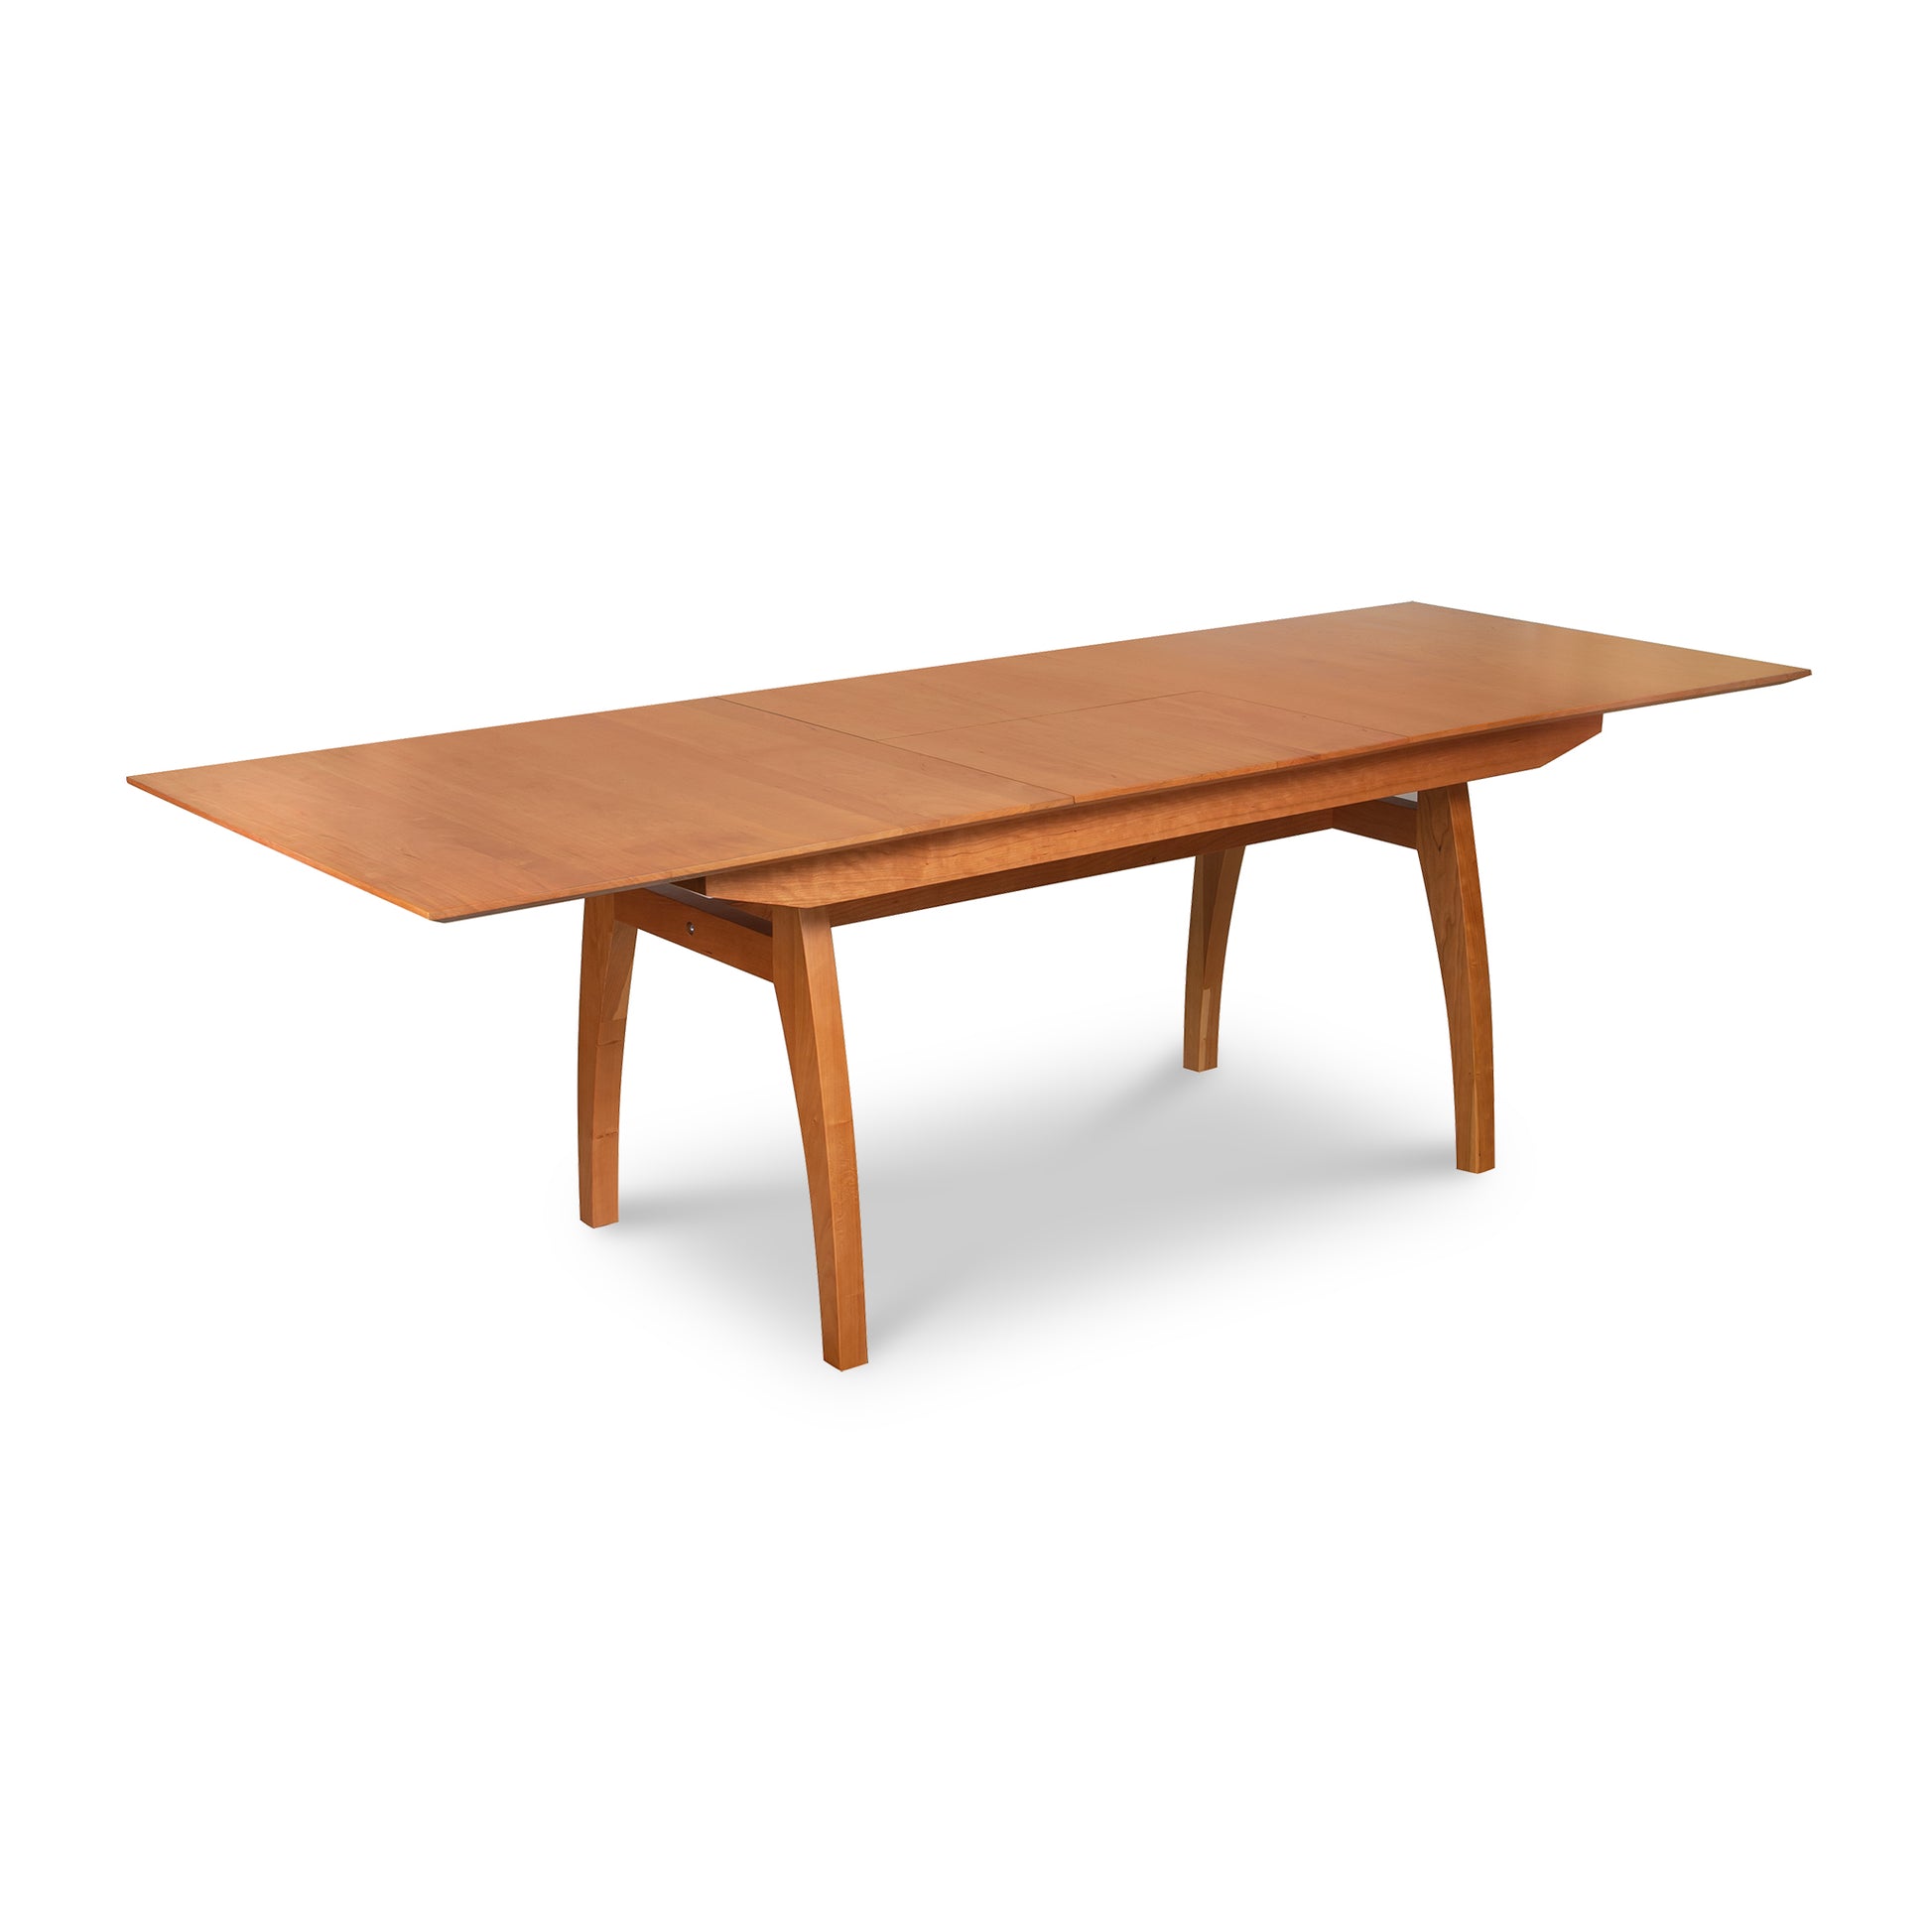 A high-end wooden Vermont Modern Butterfly Extension Table from Lyndon Furniture with a wooden top.